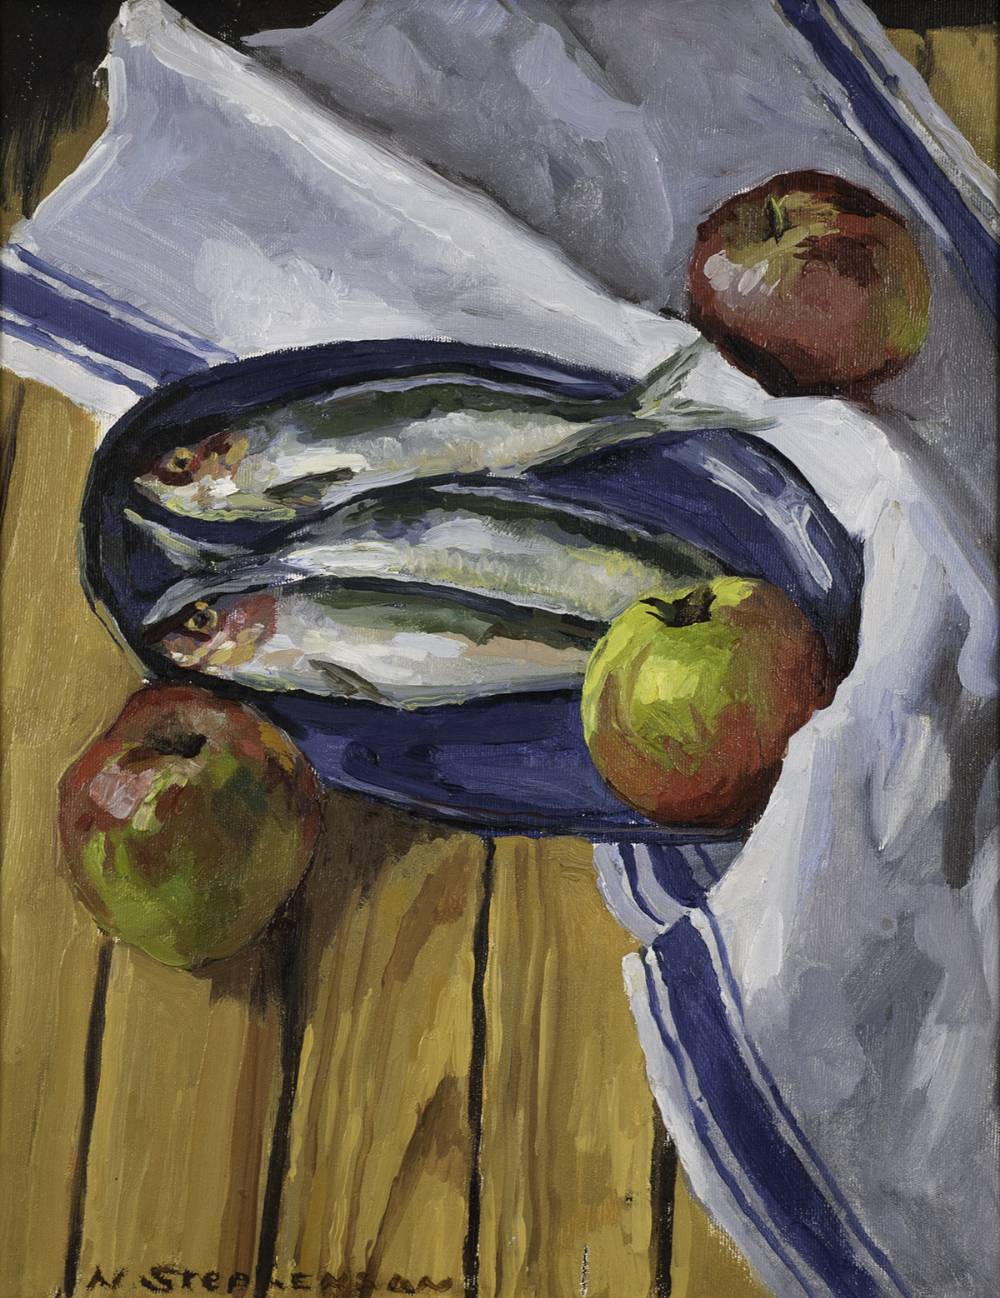 FRUIT OF THE SEA by Nuala Stephenson (1921 - 2010) at Whyte's Auctions